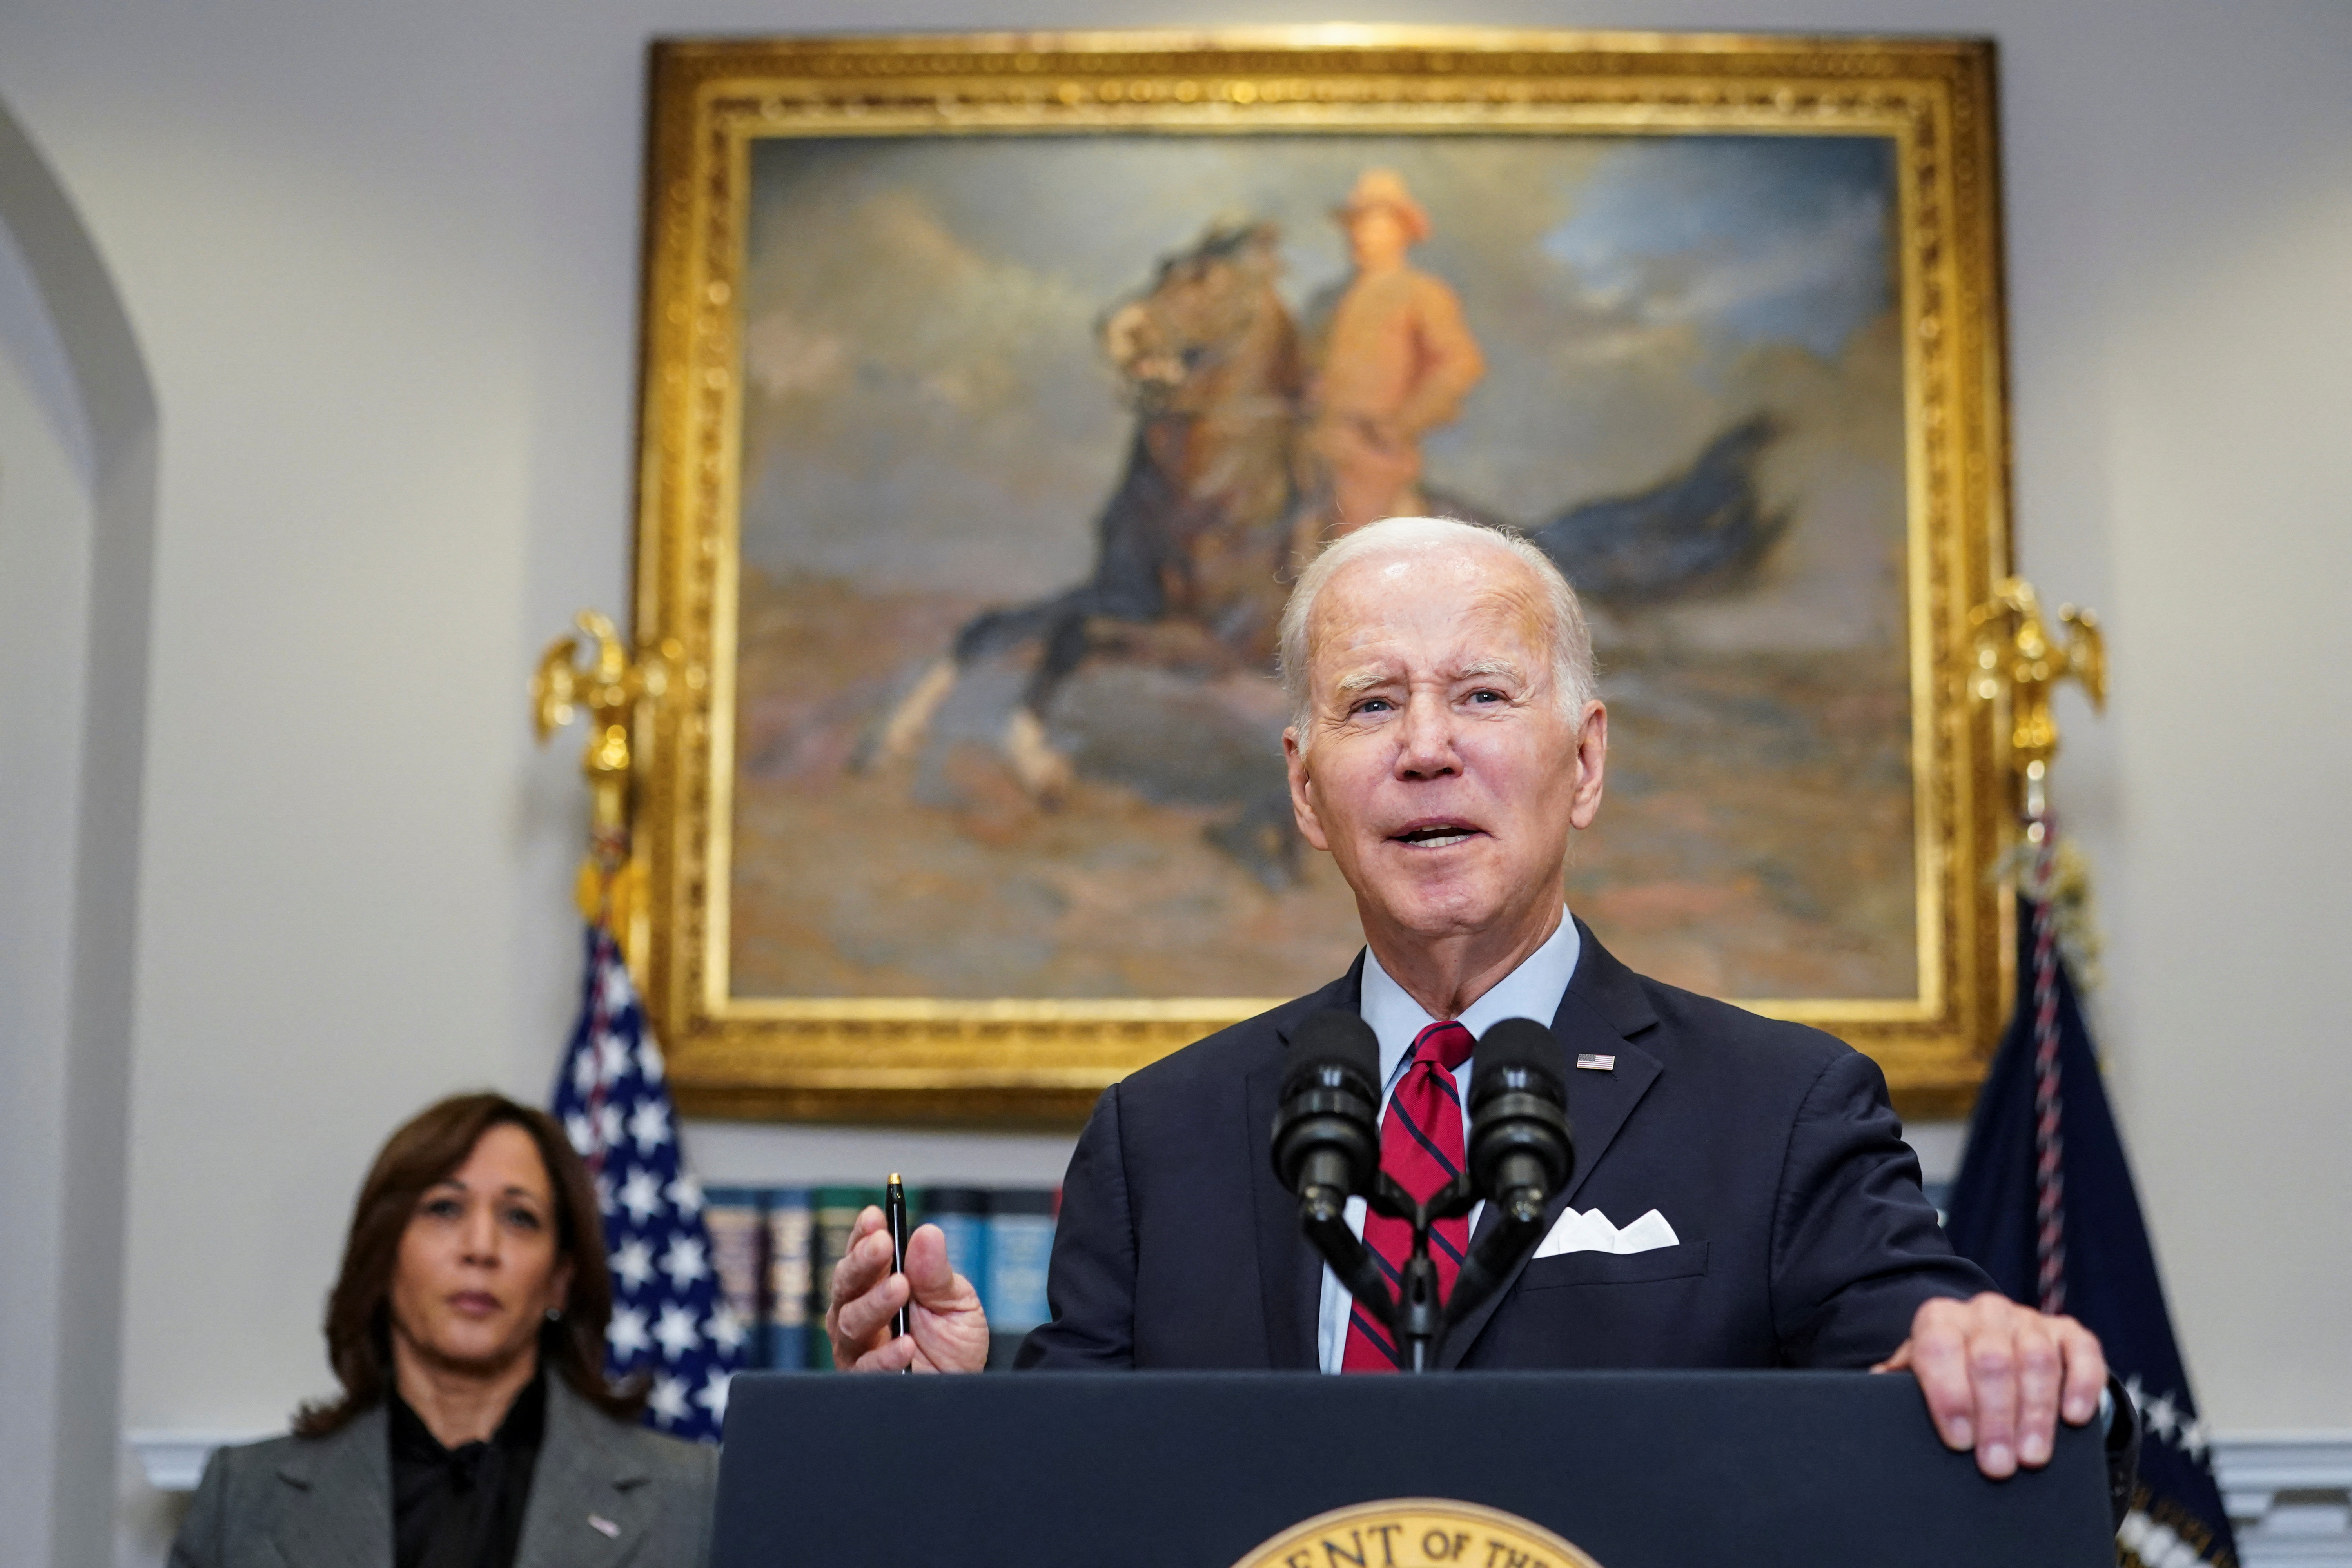 U.S. President Joe Biden is flanked by Vice President Kamala Harris as he speaks about U.S.-Mexico border security and enforcement, in the Roosevelt Room at the White House in Washington, U.S., January 5, 2023. REUTERS/Kevin Lamarque